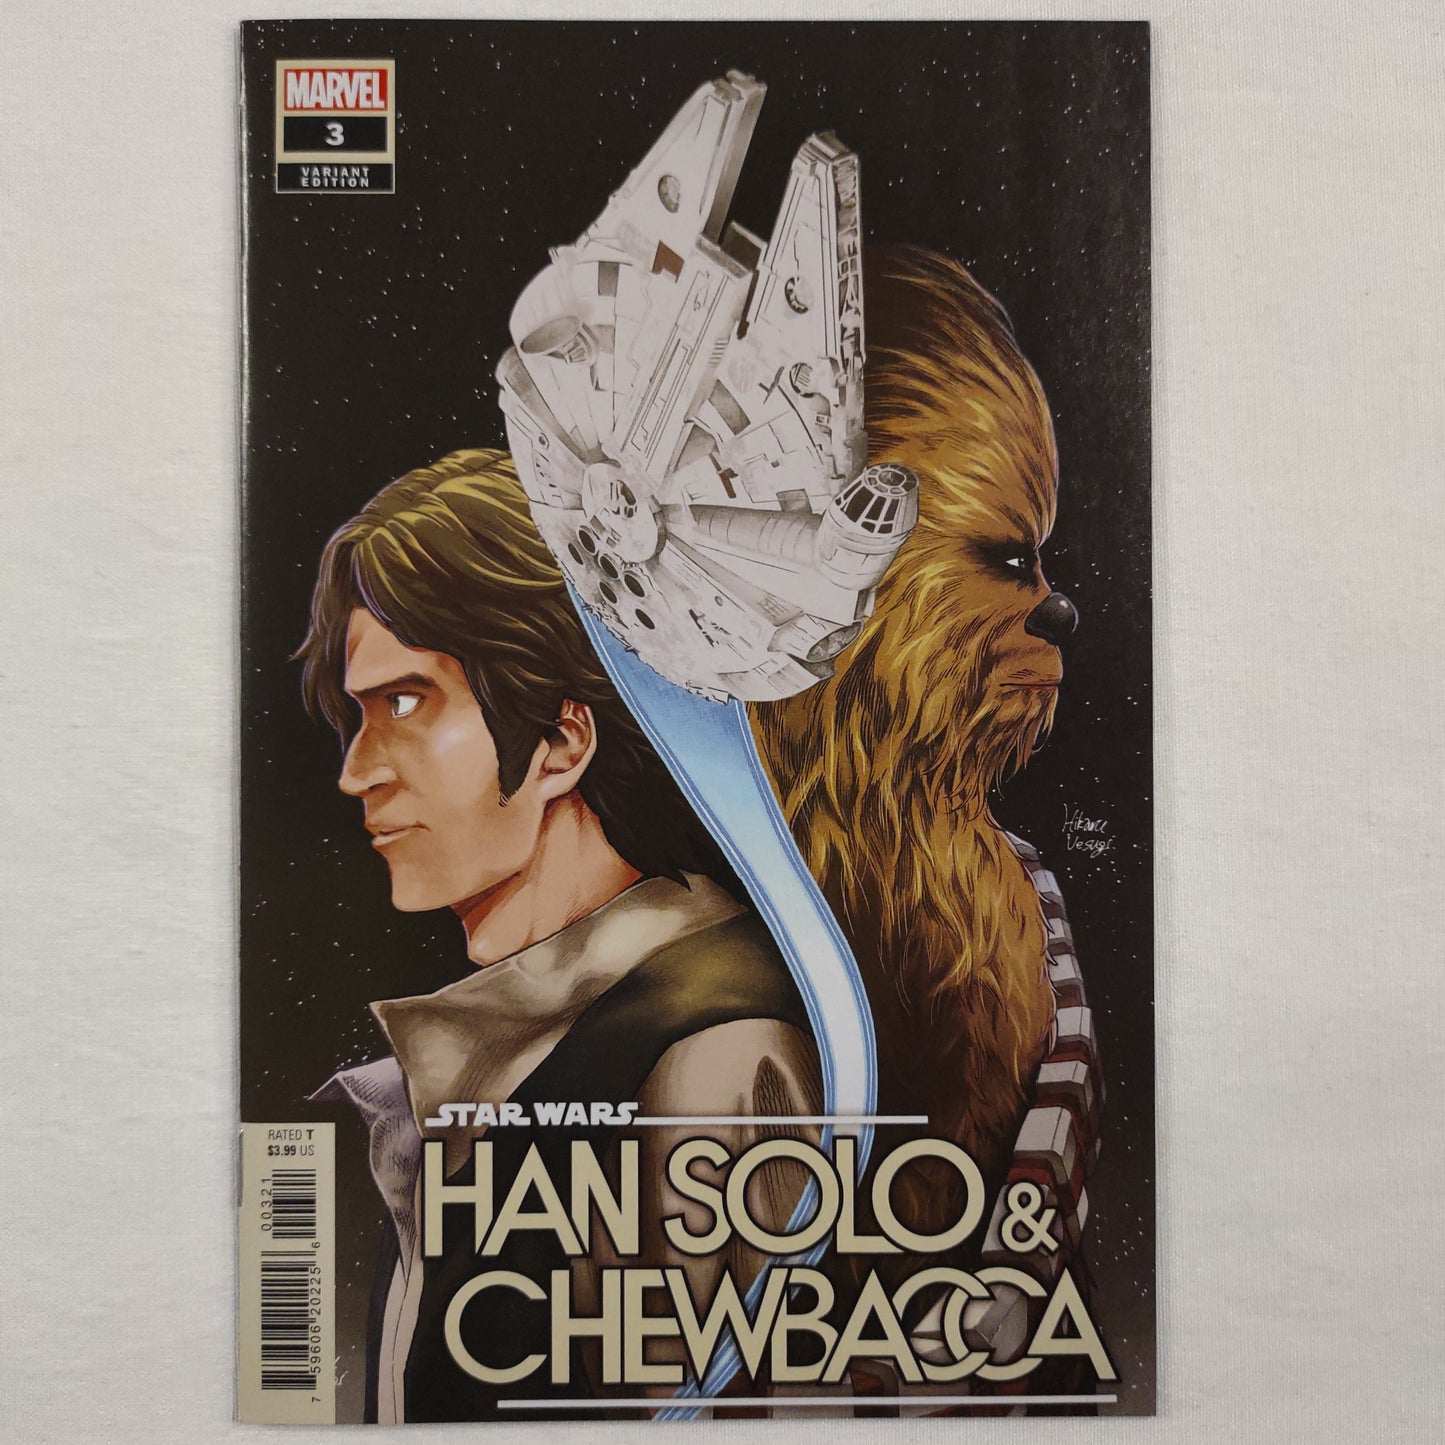 Han Solo & Chewbacca #3 Variant